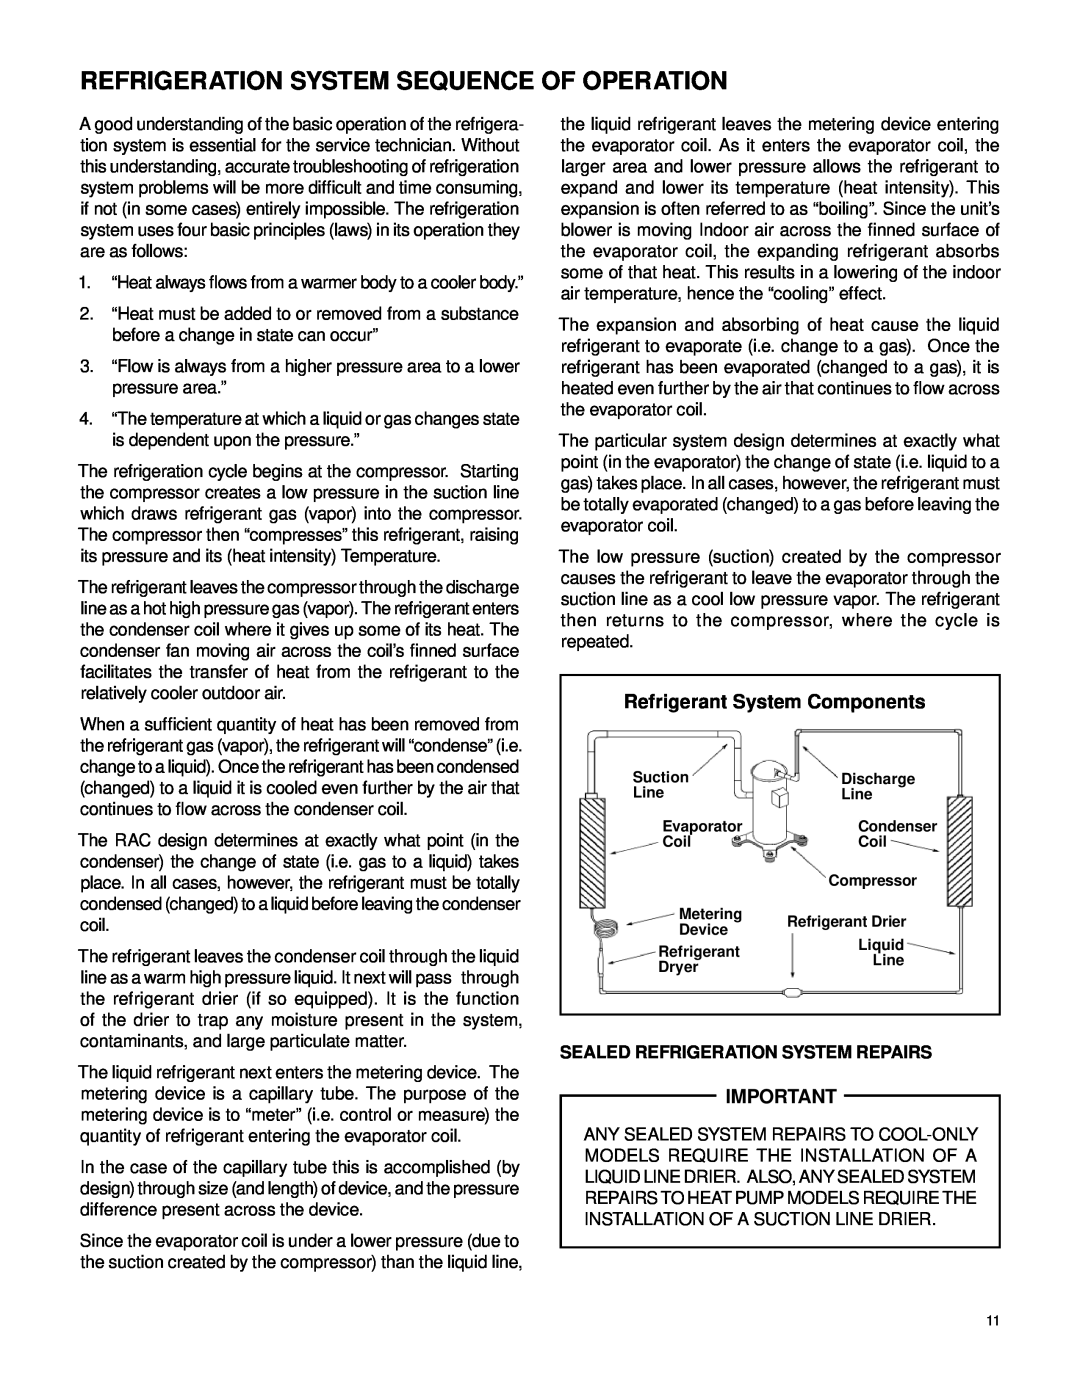 Friedrich 2007 service manual Refrigeration System Sequence Of Operation, Refrigerant System Components 